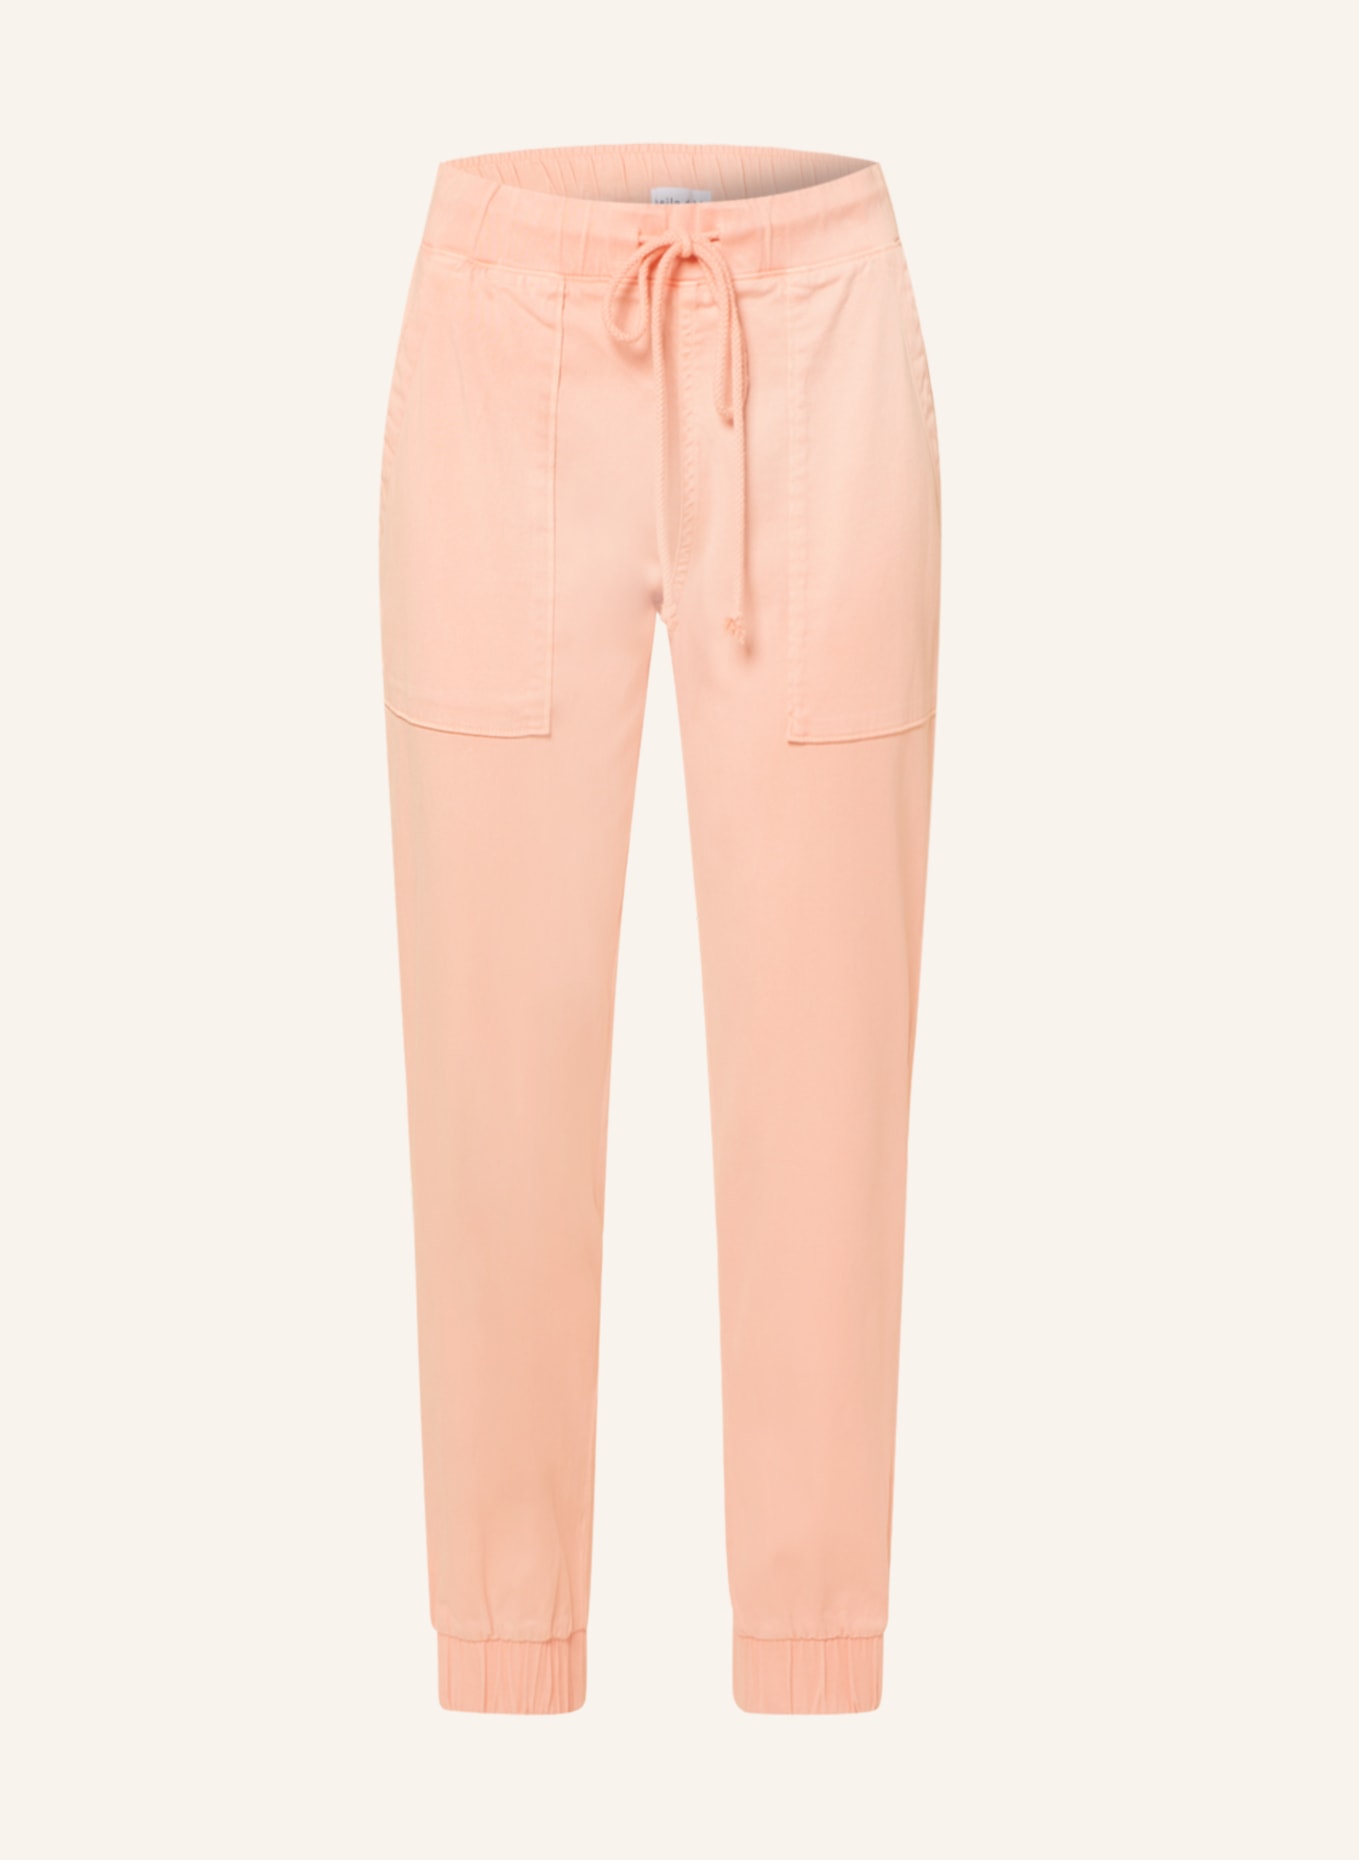 bella dahl Pants in jogger style, Color: SALMON (Image 1)